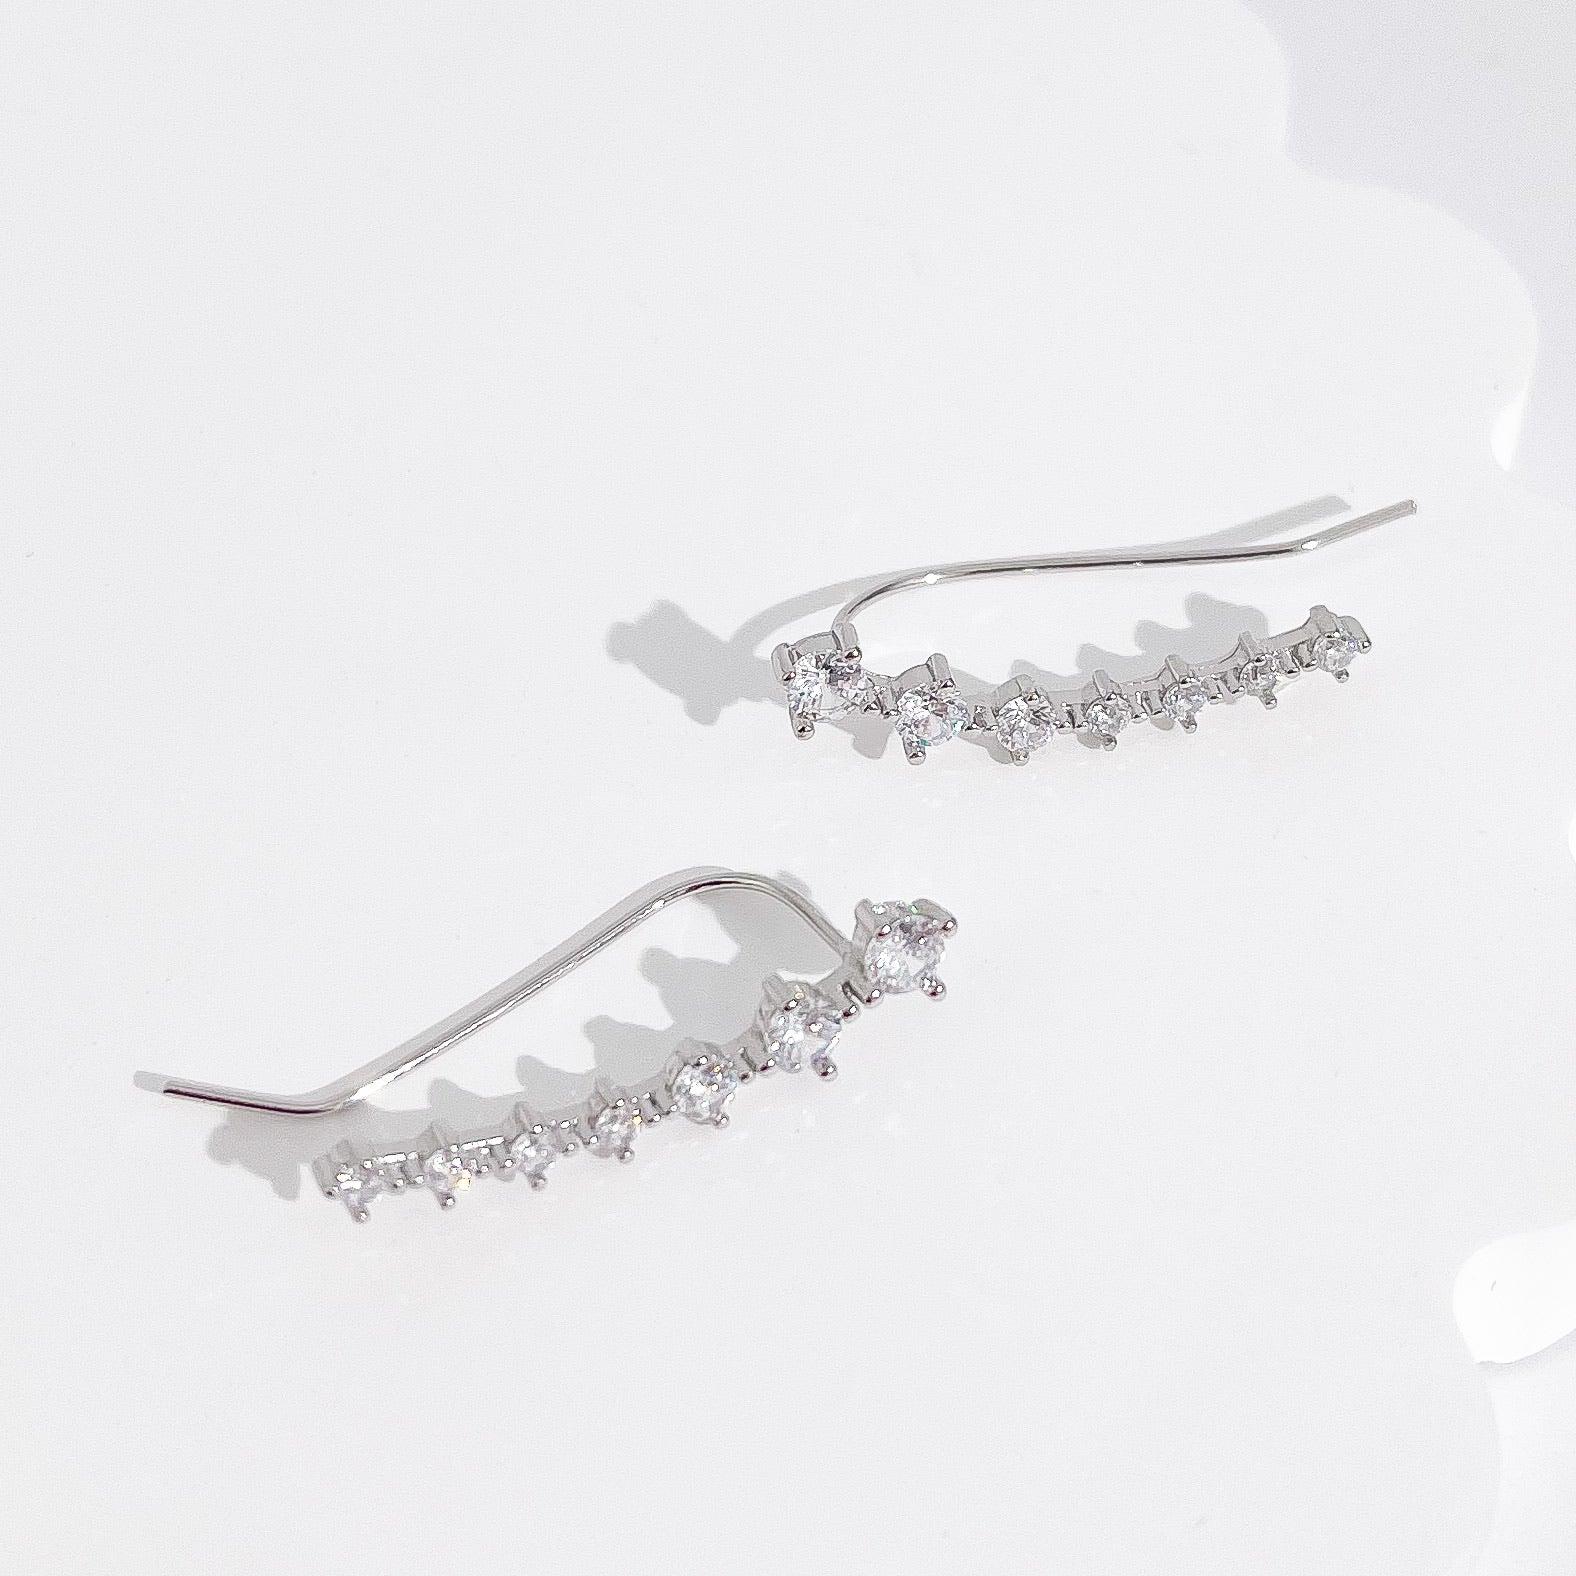 Kaylee Sterling Ear Climbers in Silver - Flaire & Co.